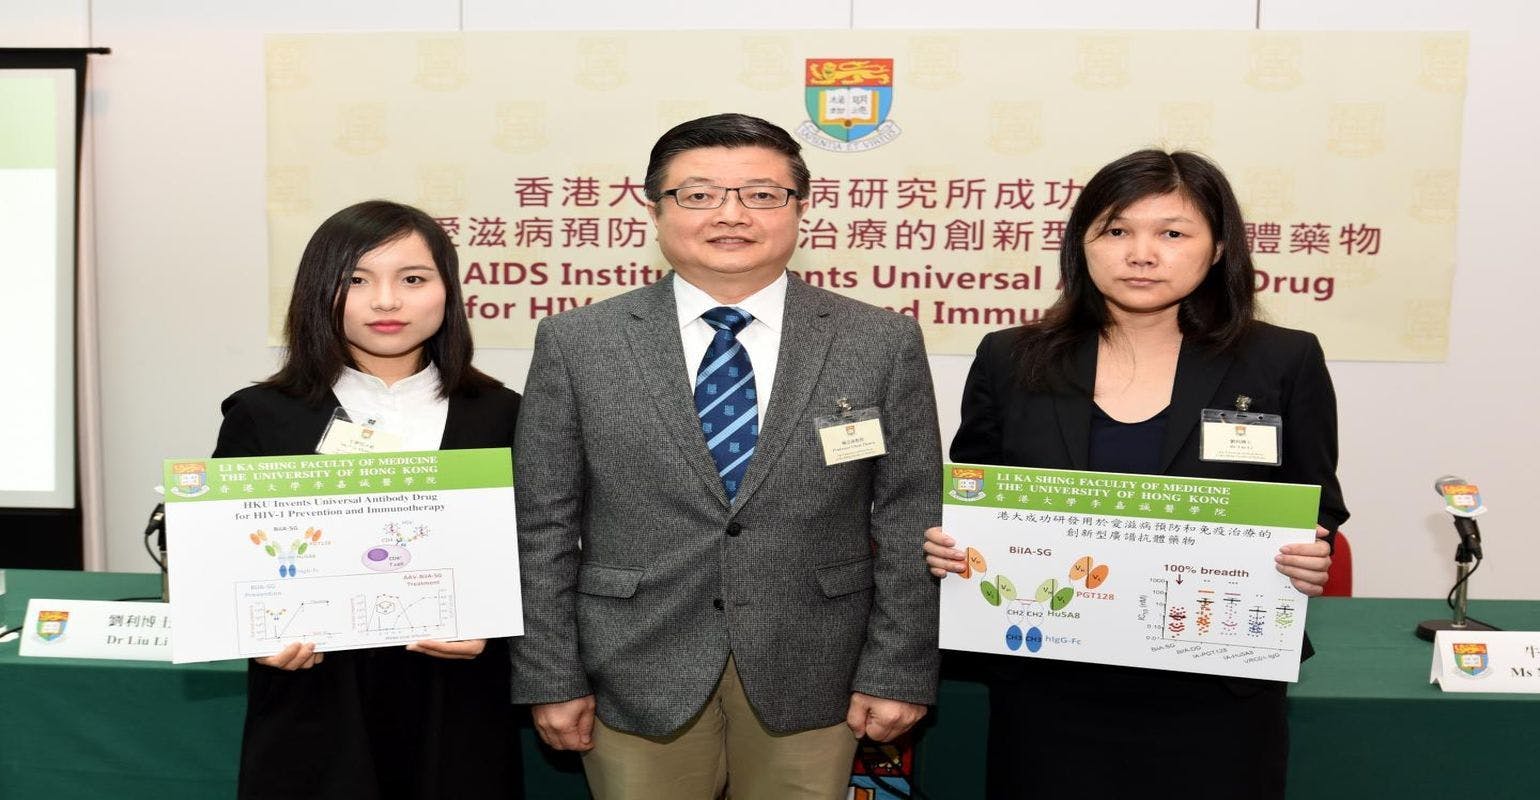 HKU AIDS Institute Engineers Universal Antibody Drug for HIV-1 Prevention and Immunotherapy